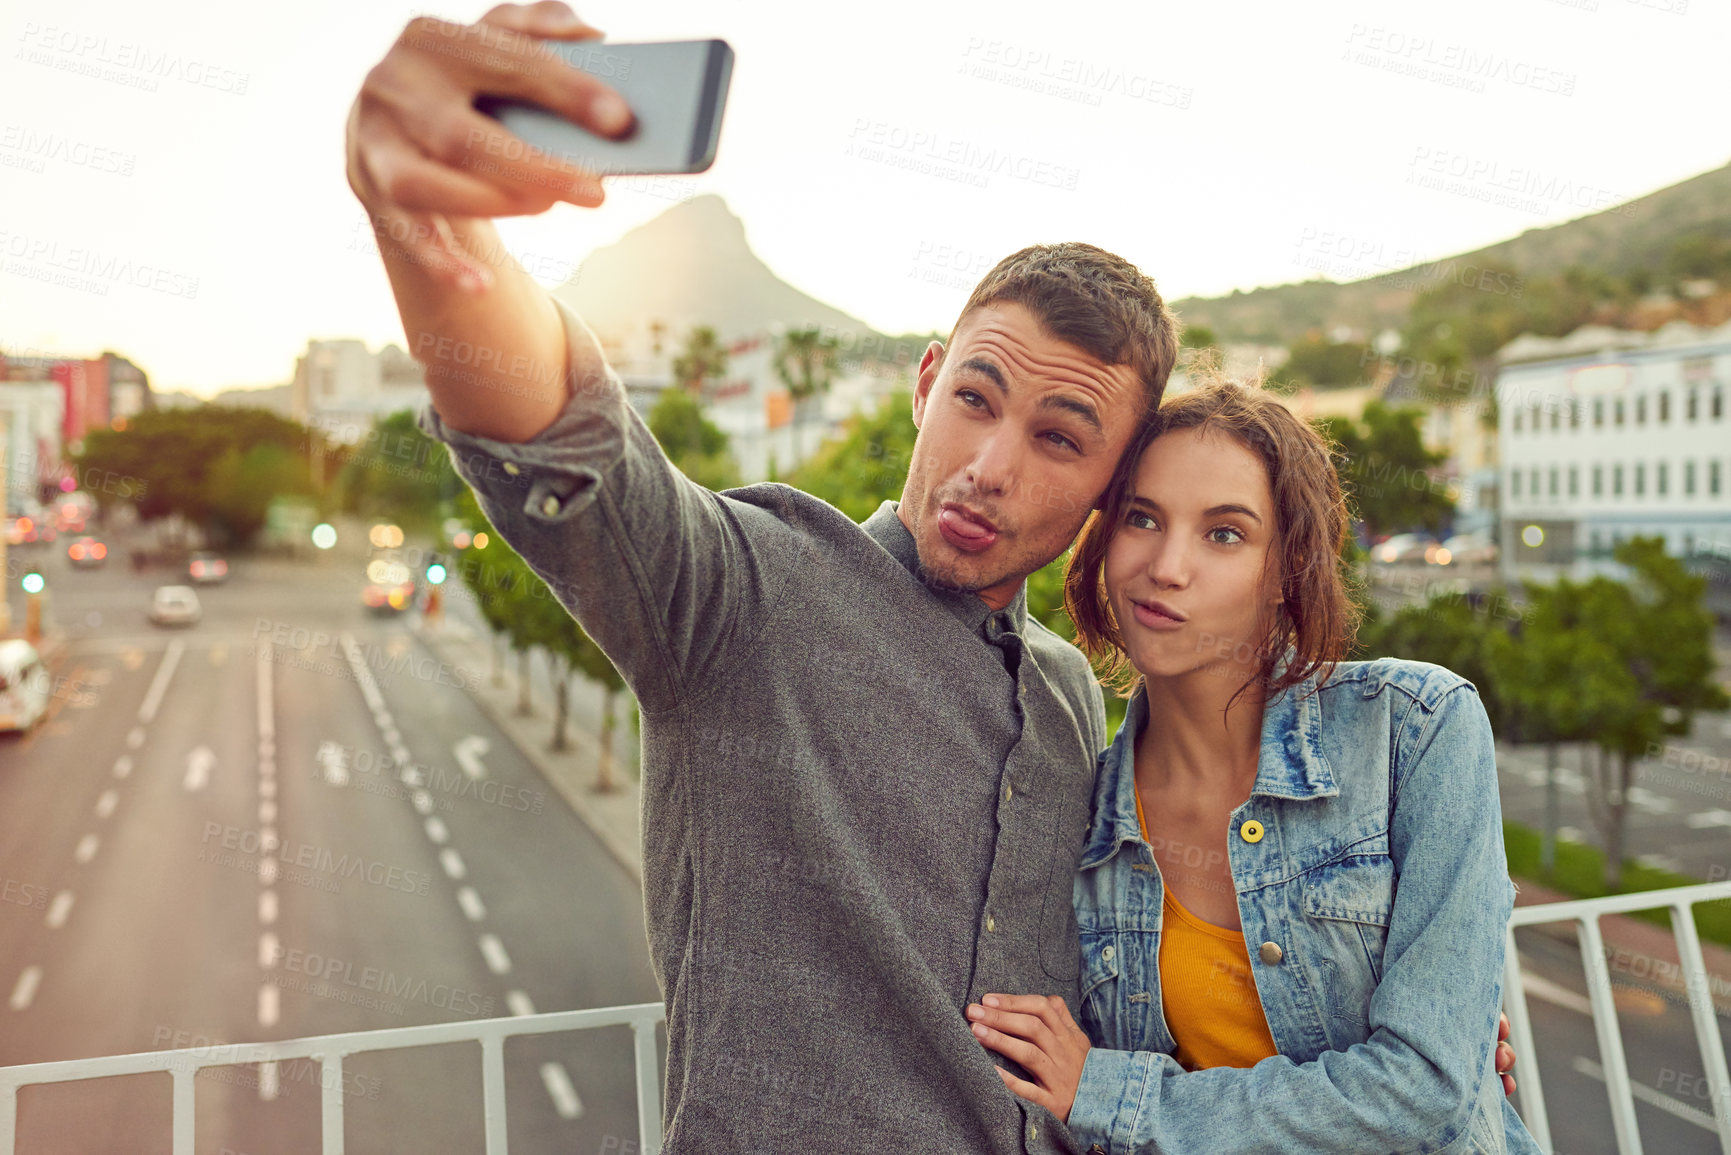 Buy stock photo Shot of a happy young couple taking a selfie together in the city